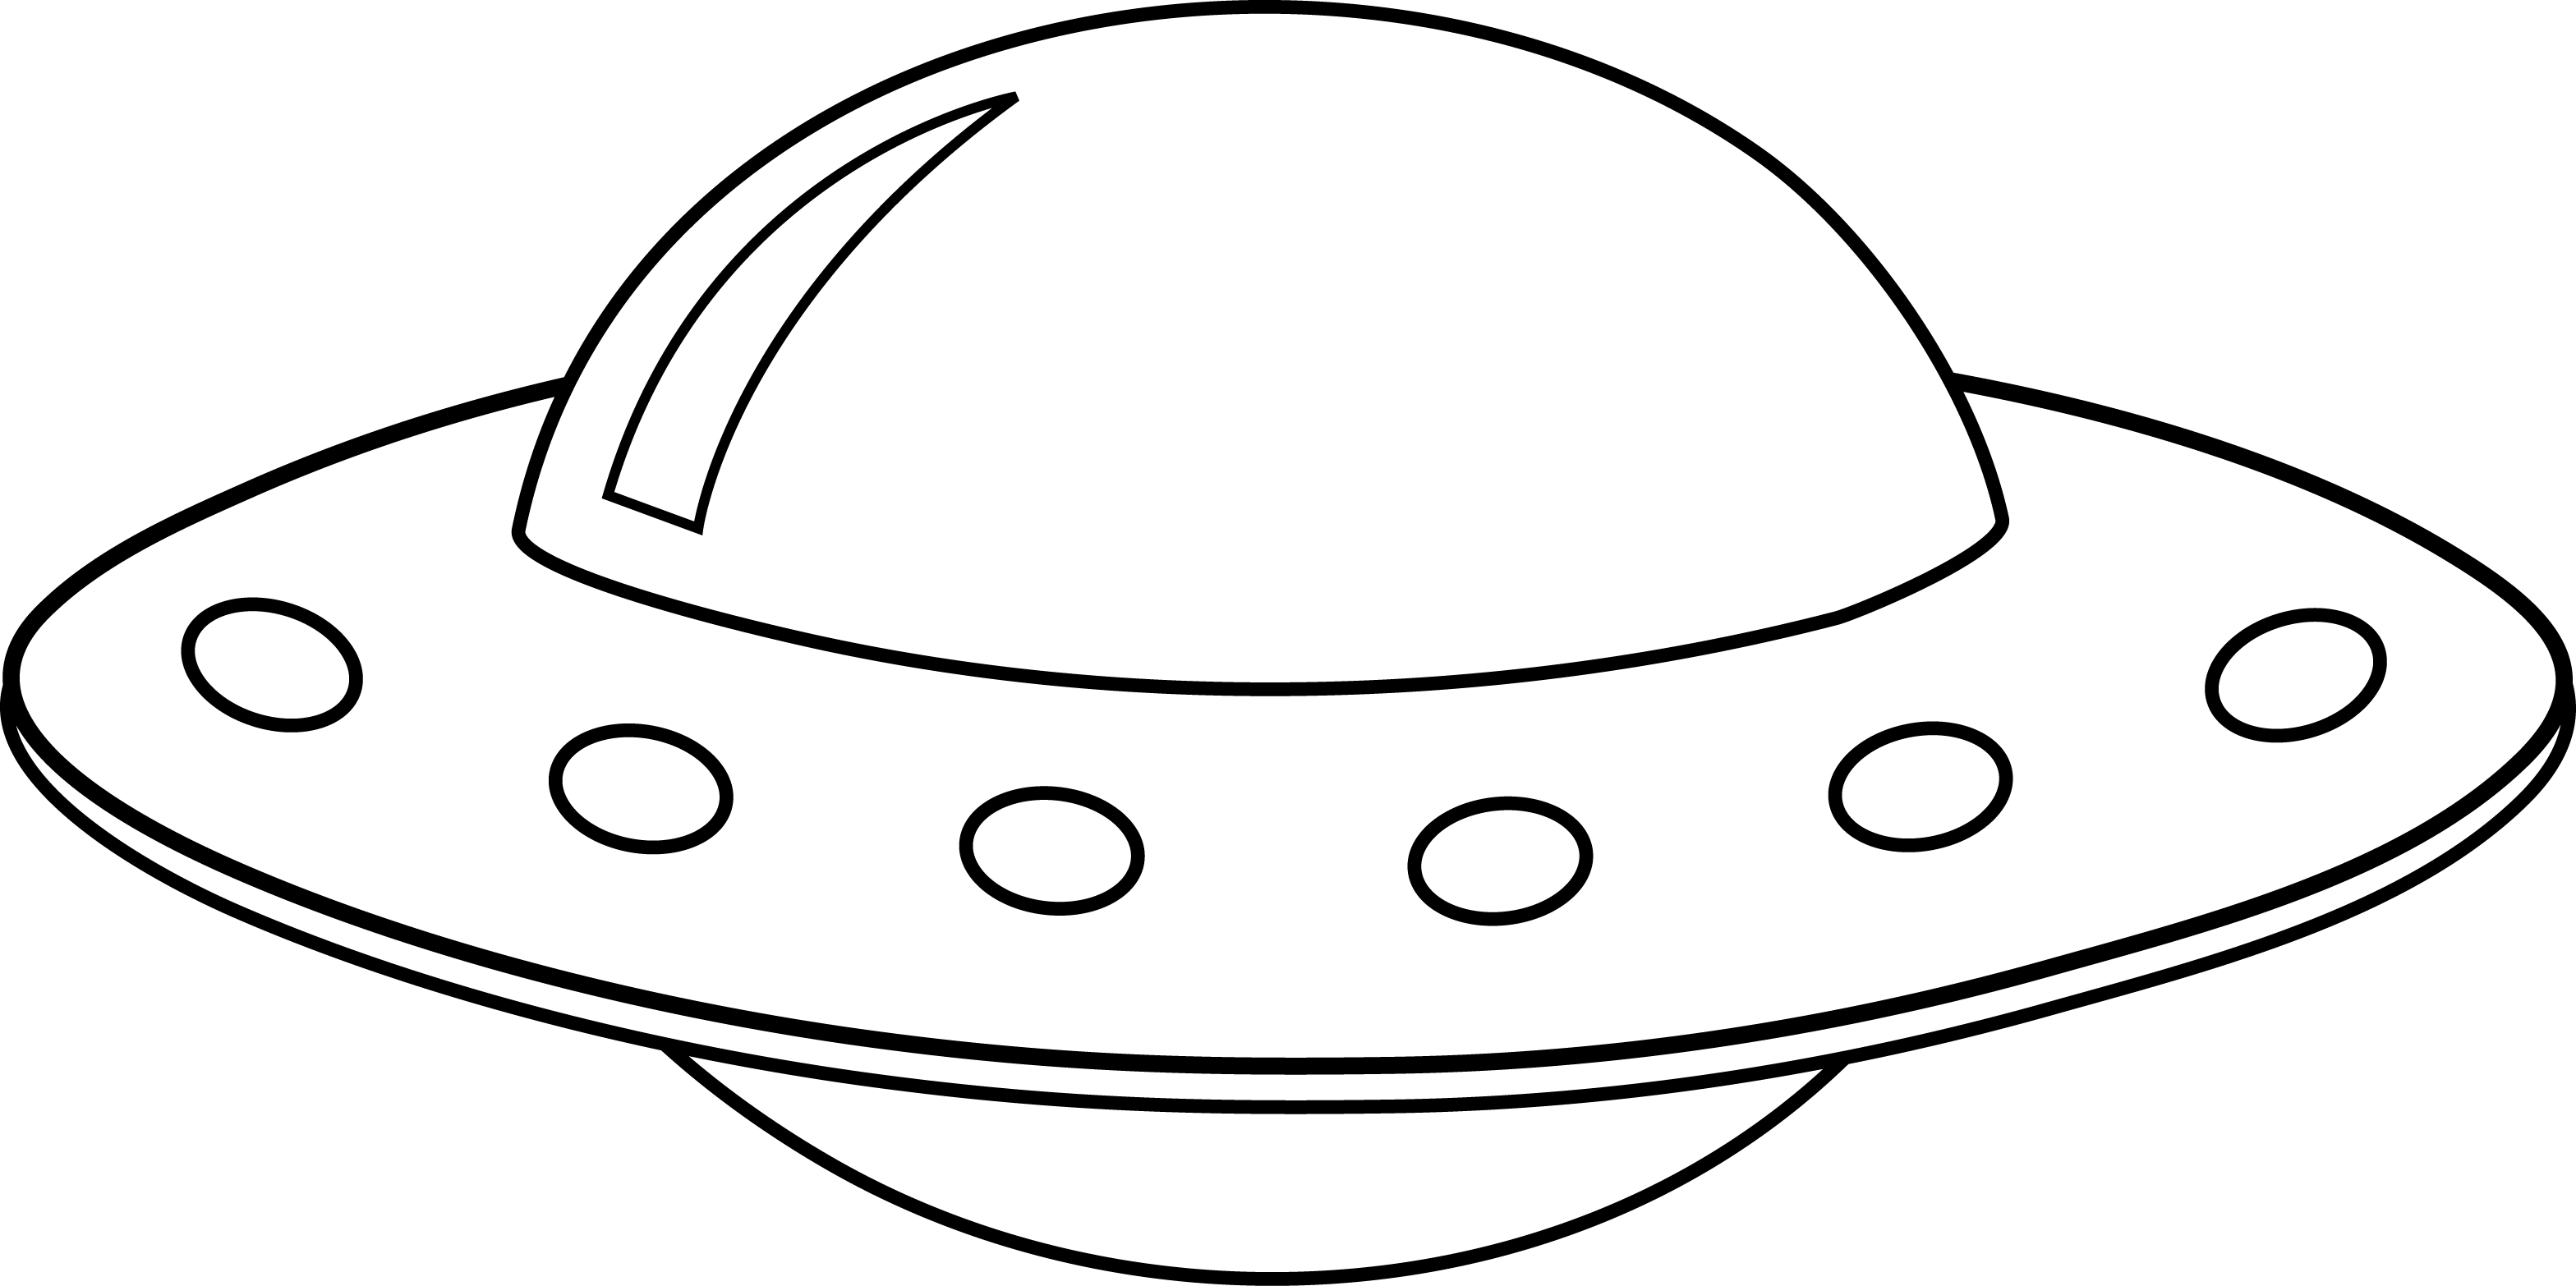 Flying saucer clipart.